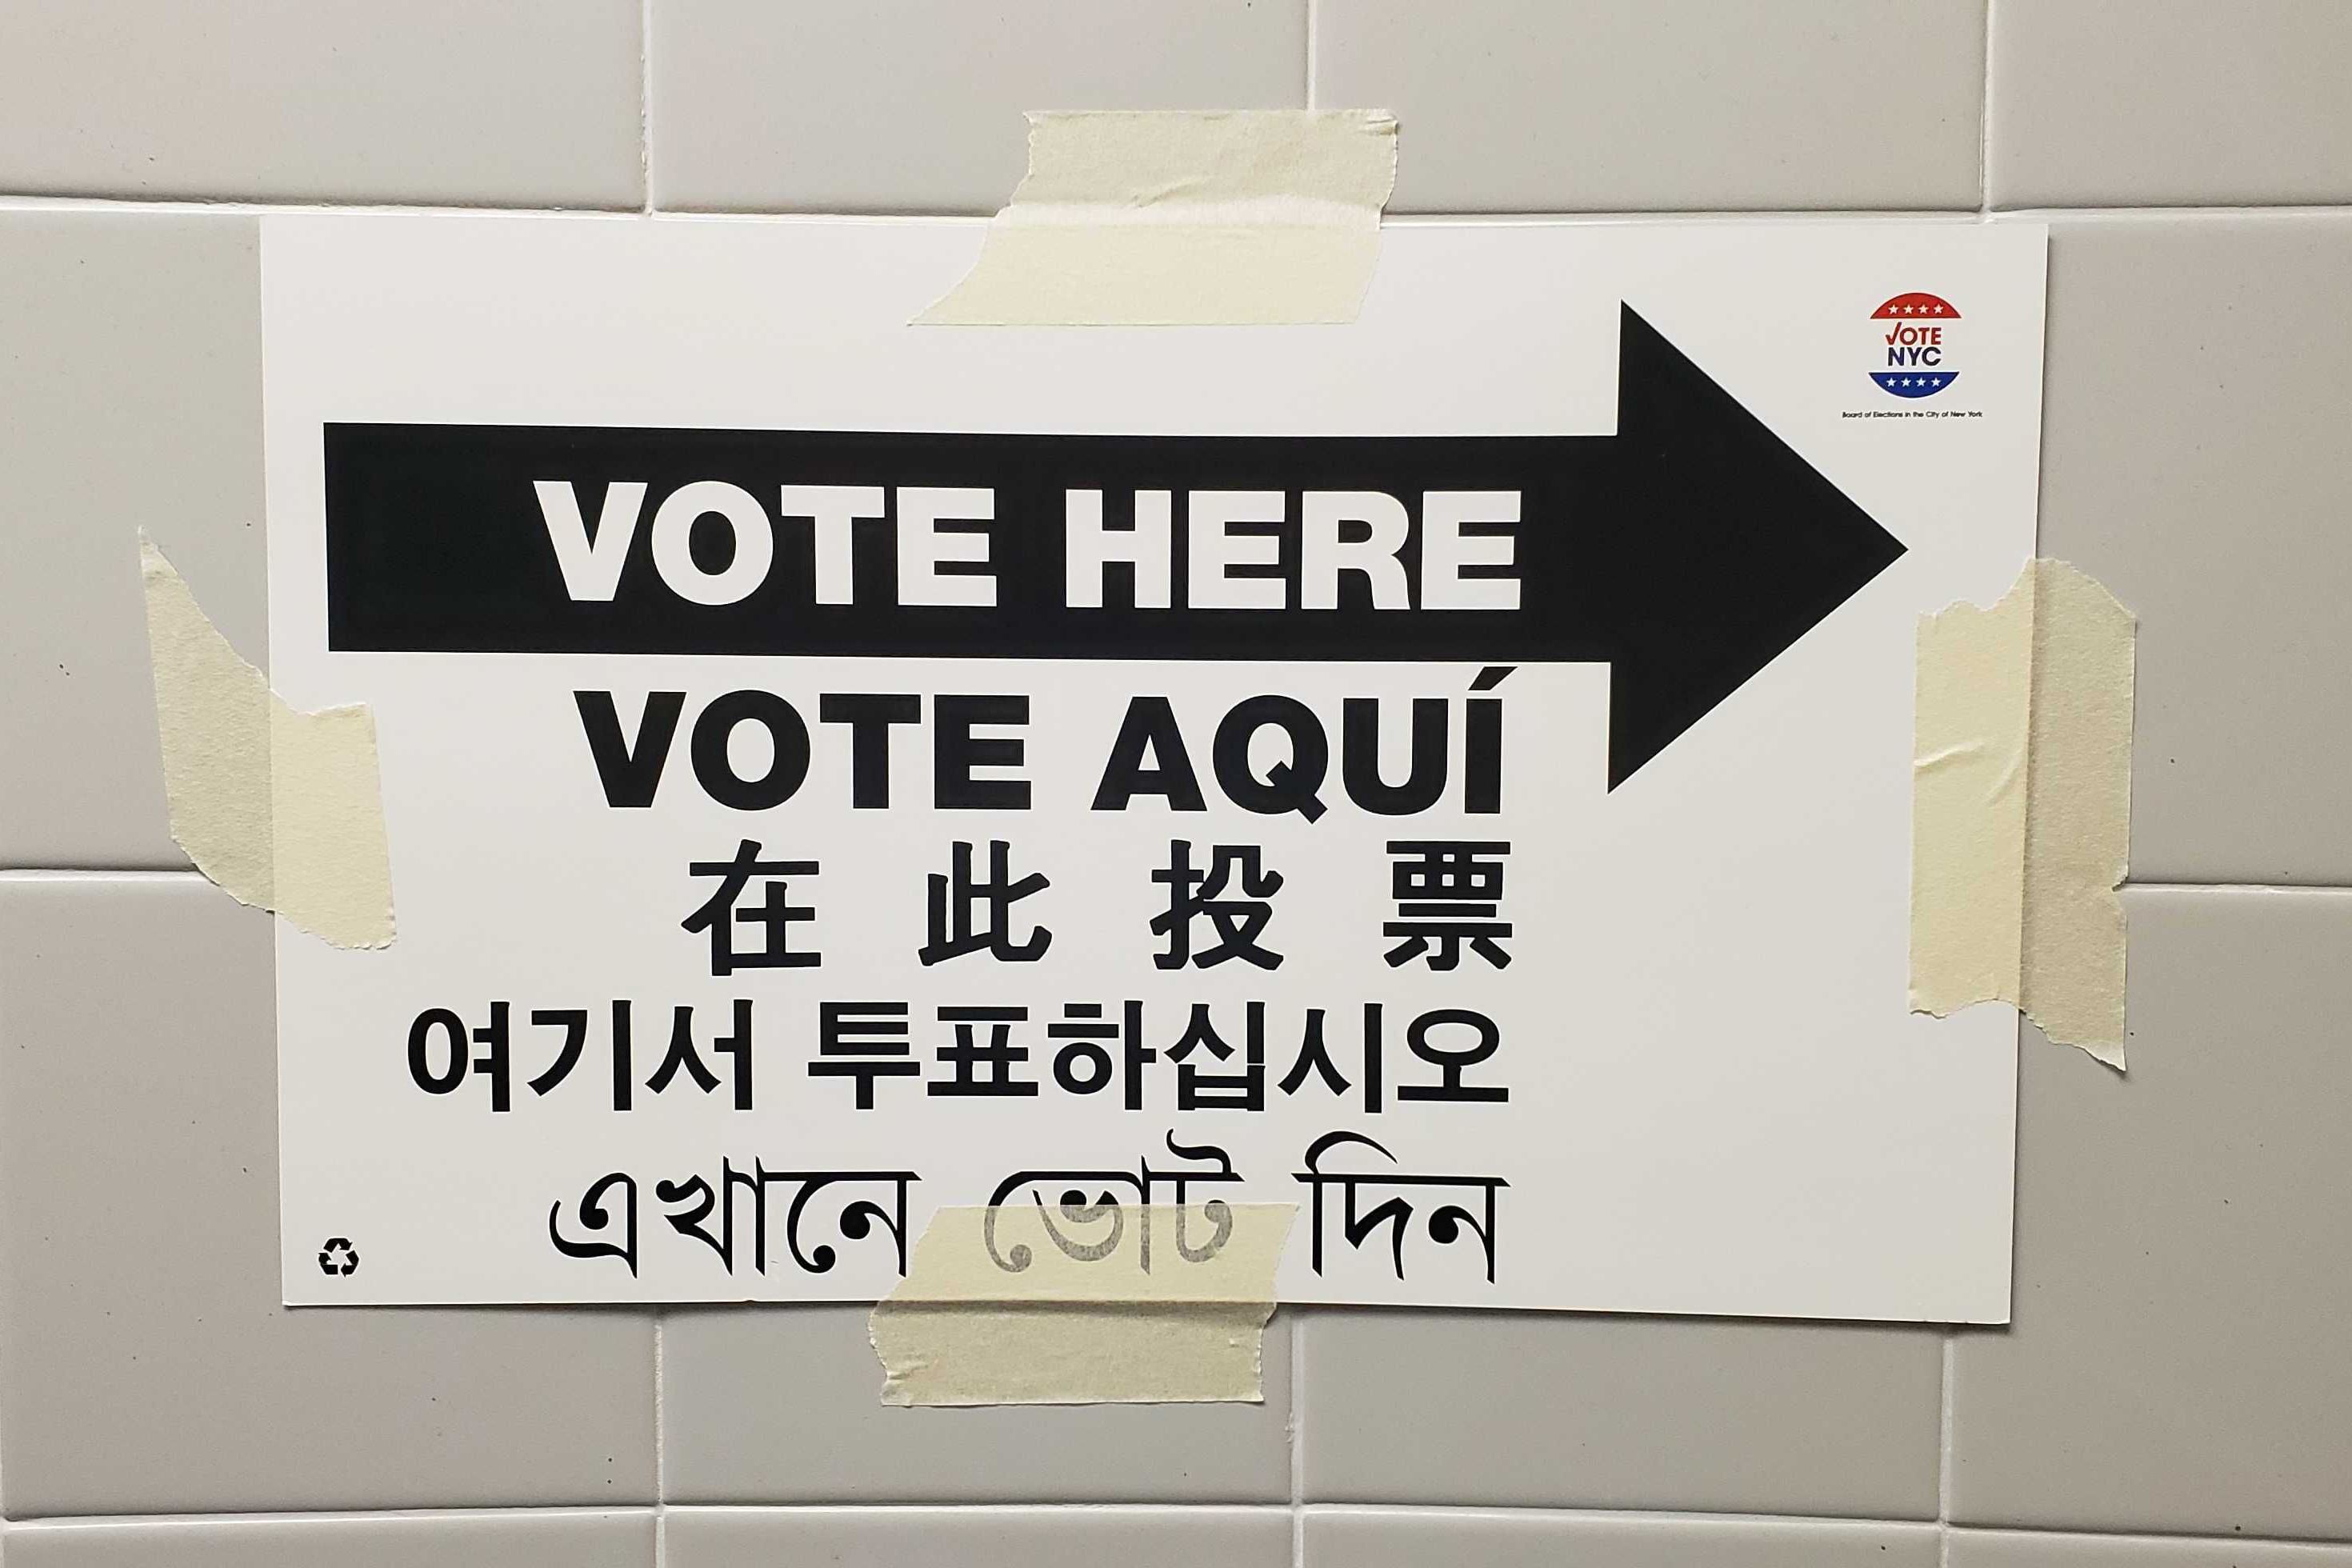 A sign directs voters toward the polling site at PS 70 in Astoria, Queens.